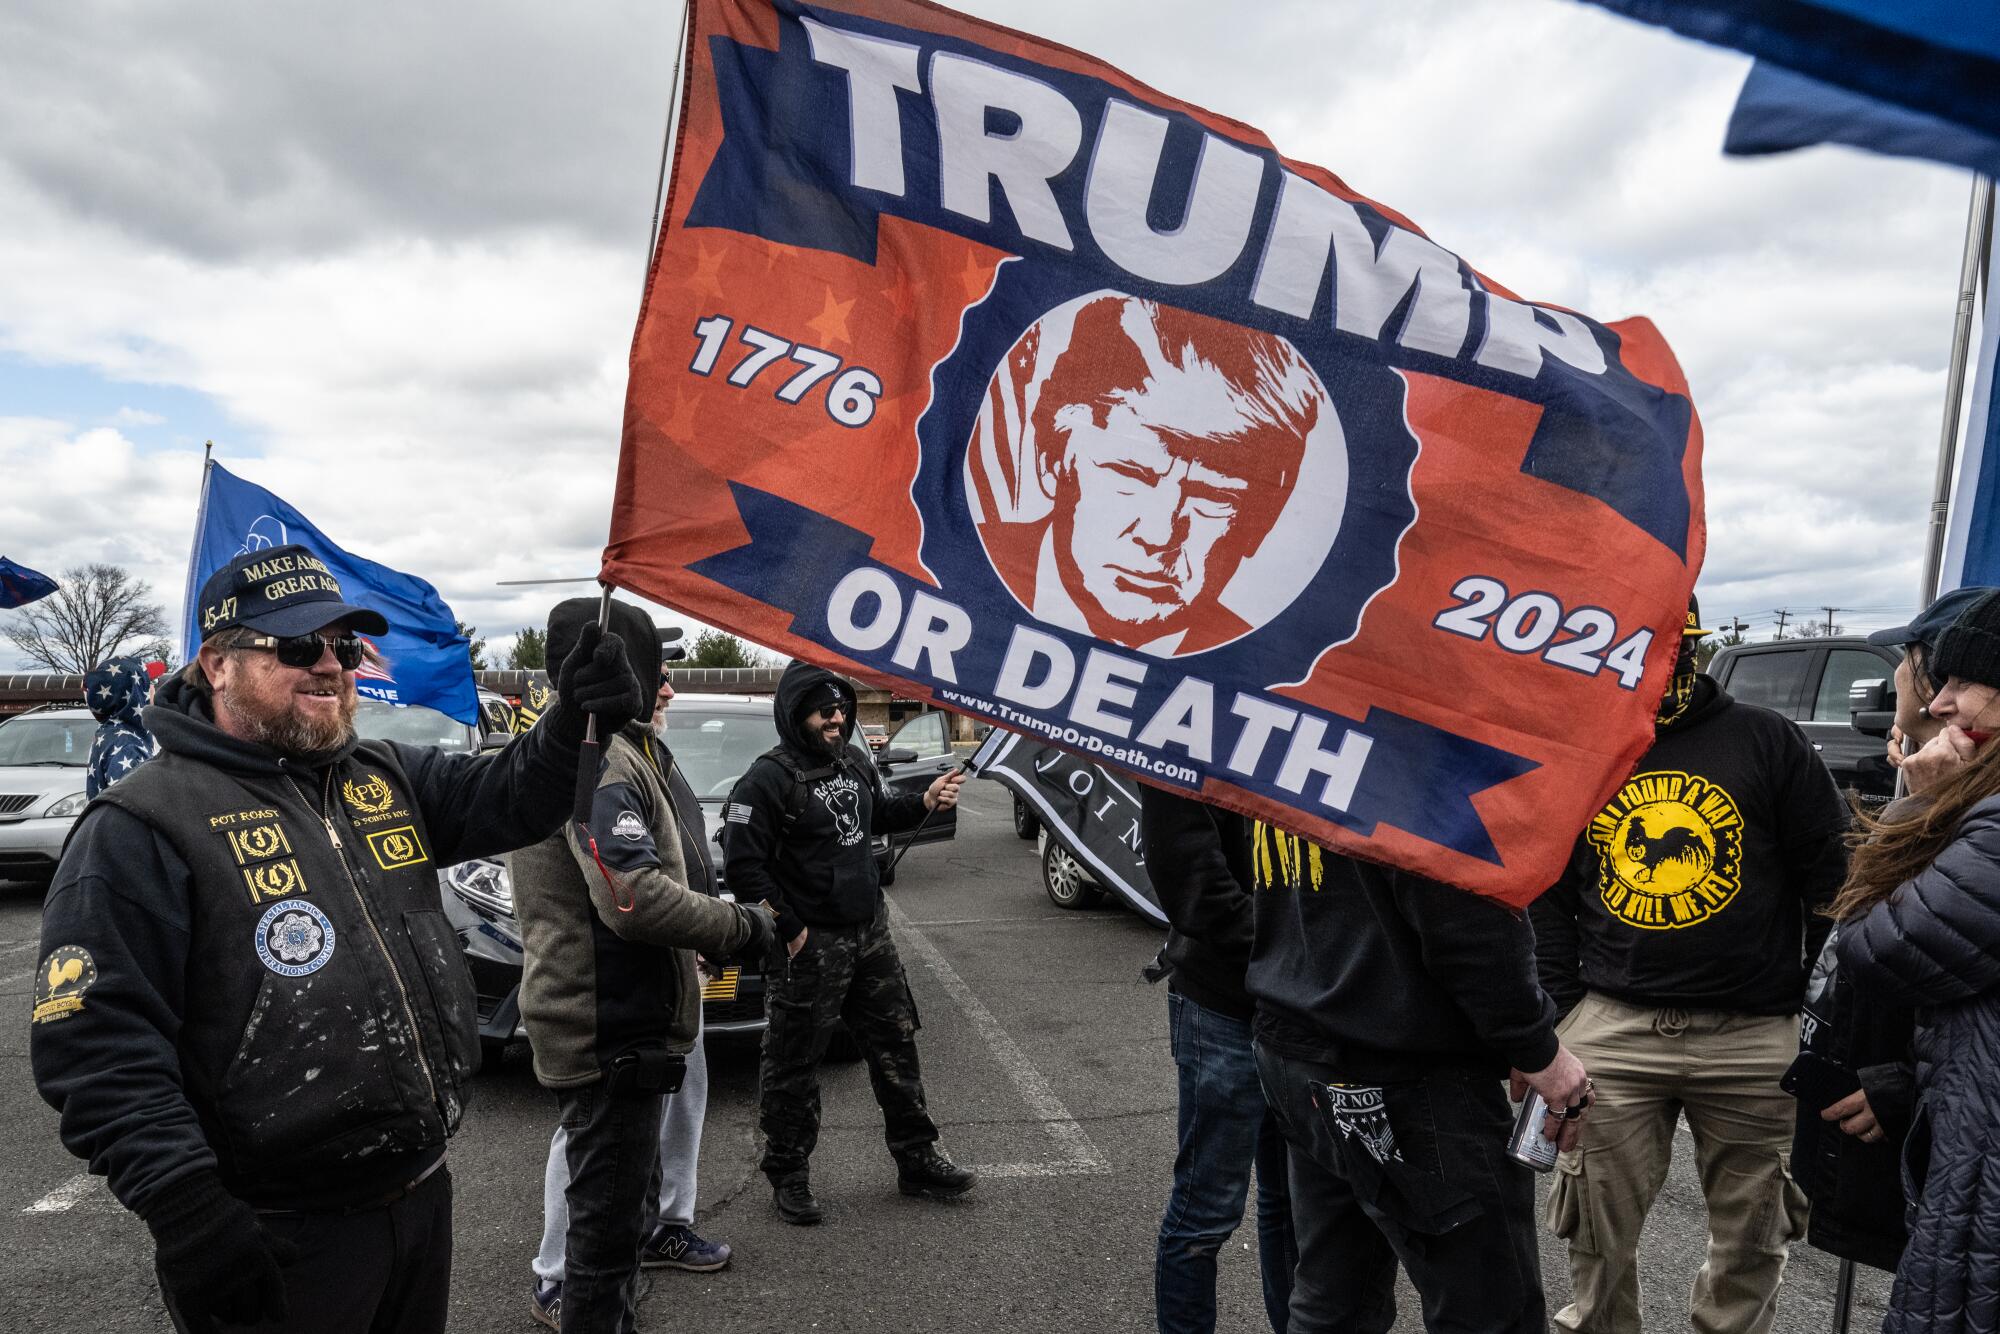 People in a parking lot, some with flags, one reading "Trump or death" with 1776 and 2024 on either side of his image.